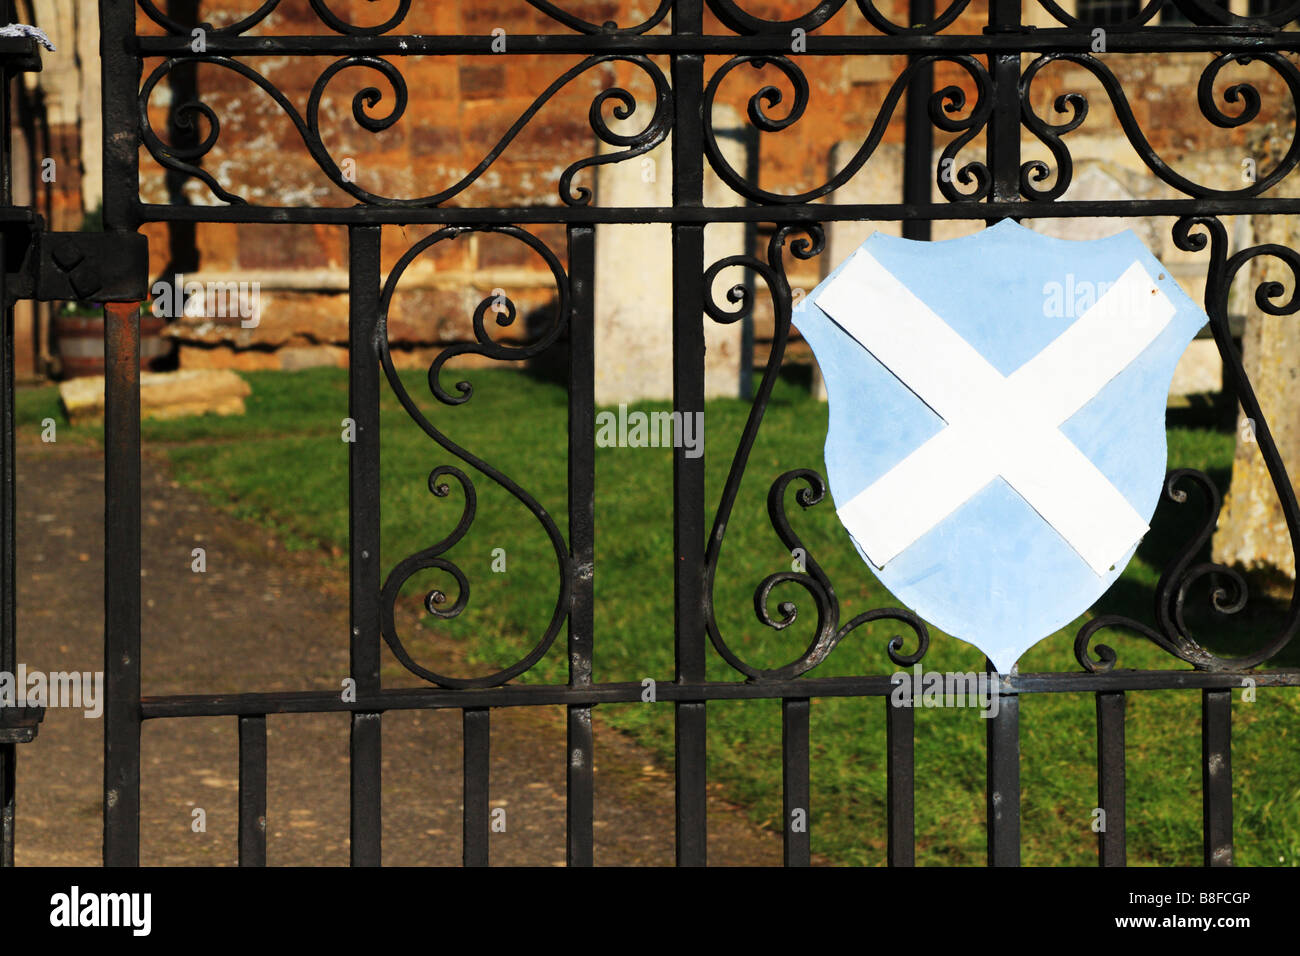 Wrought iron church gates with the cross of St Andrew shield in front Stock Photo